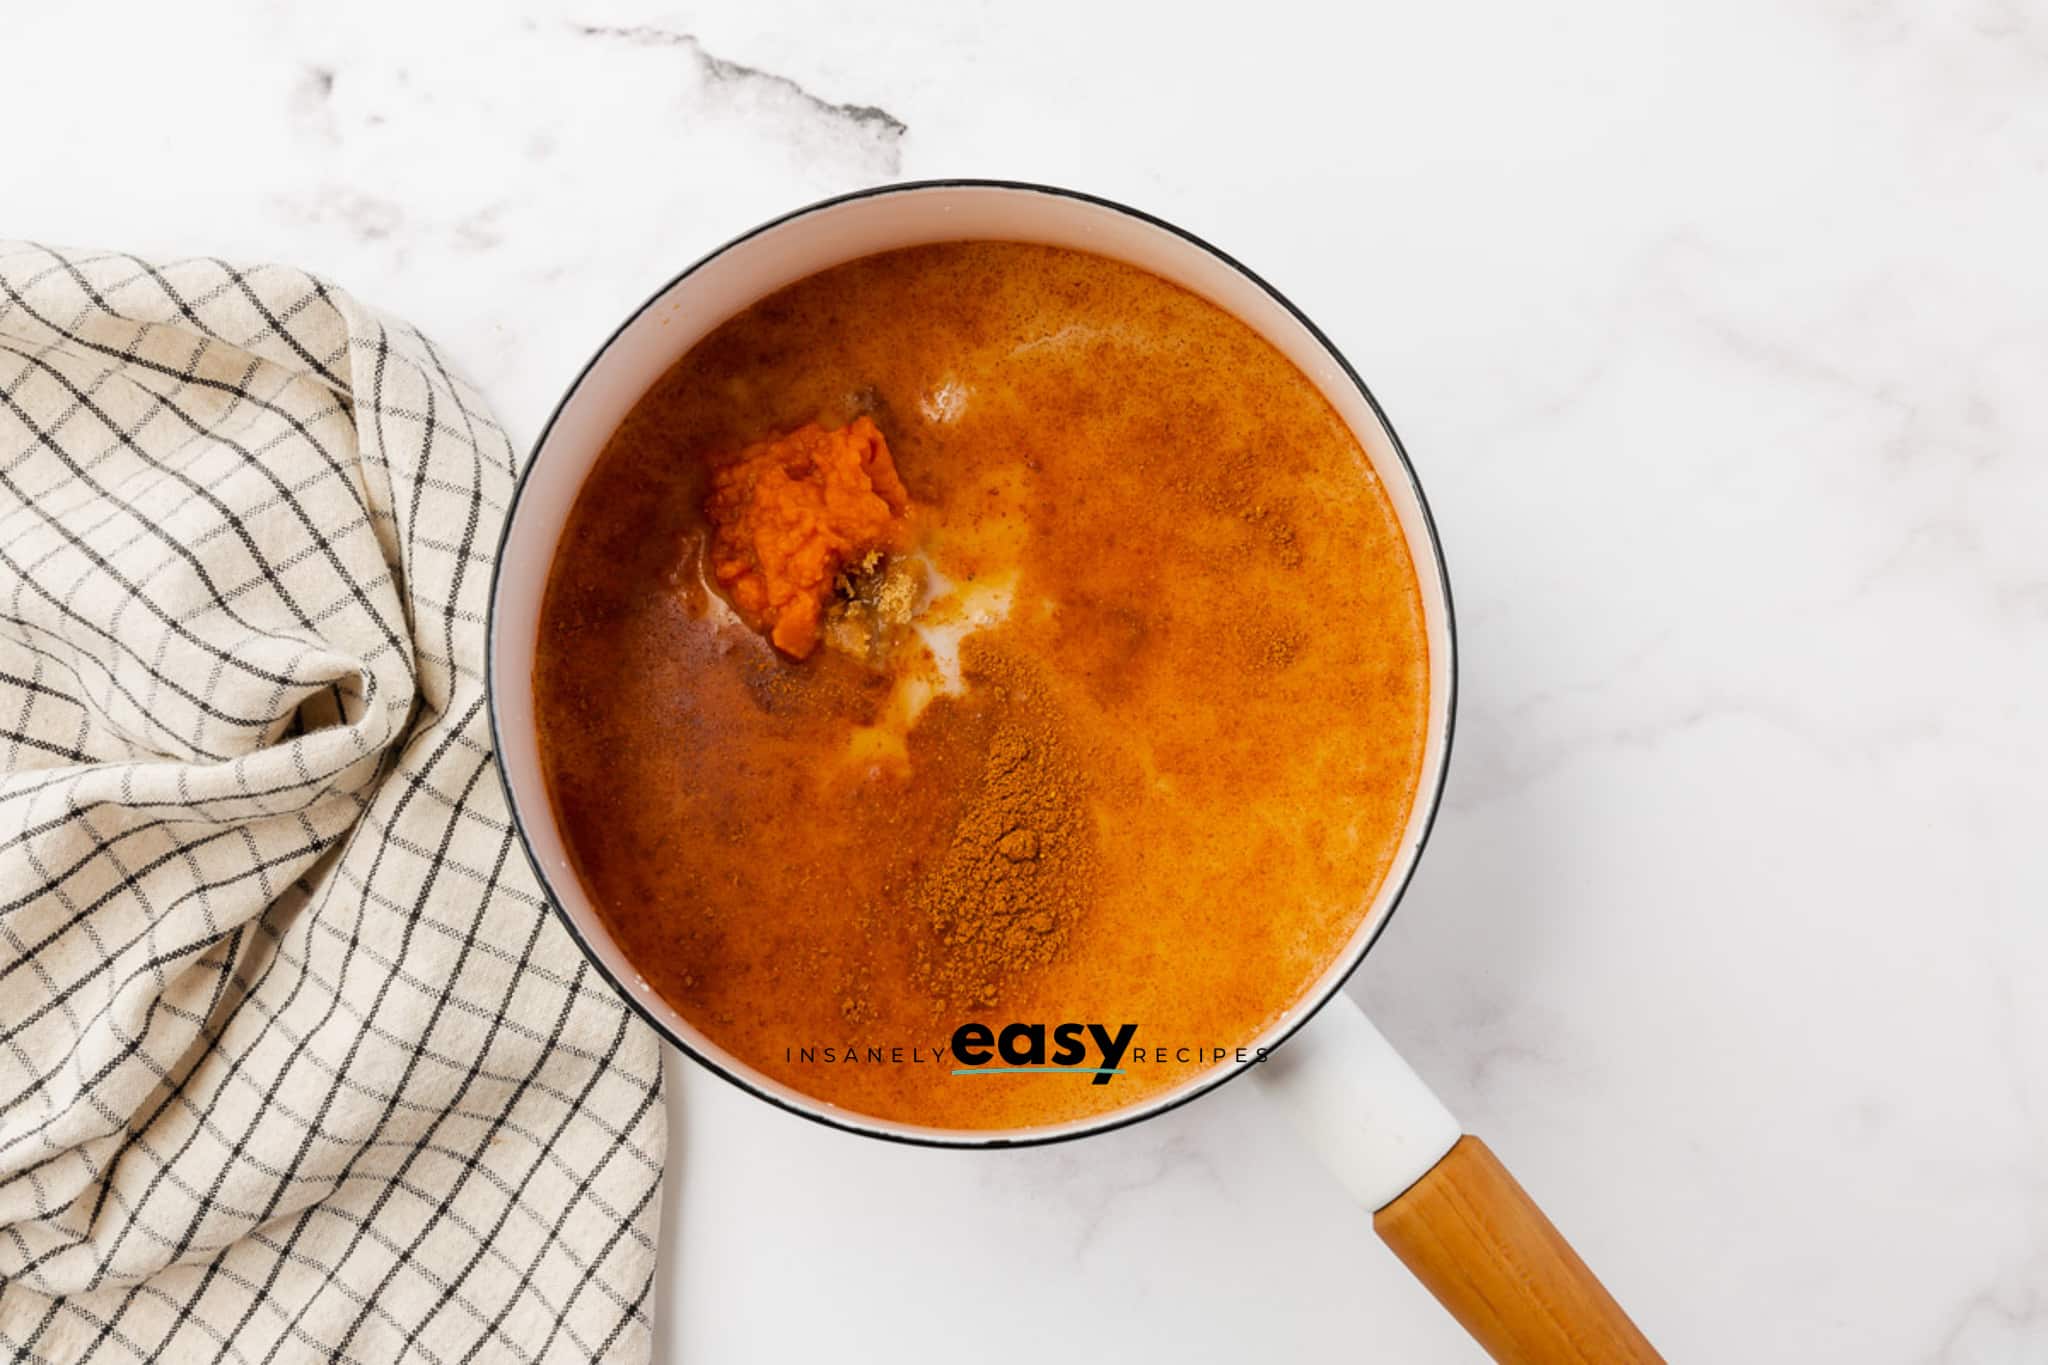 Milk, pumpkin, spices in a white enameled saucepan with wooden handle